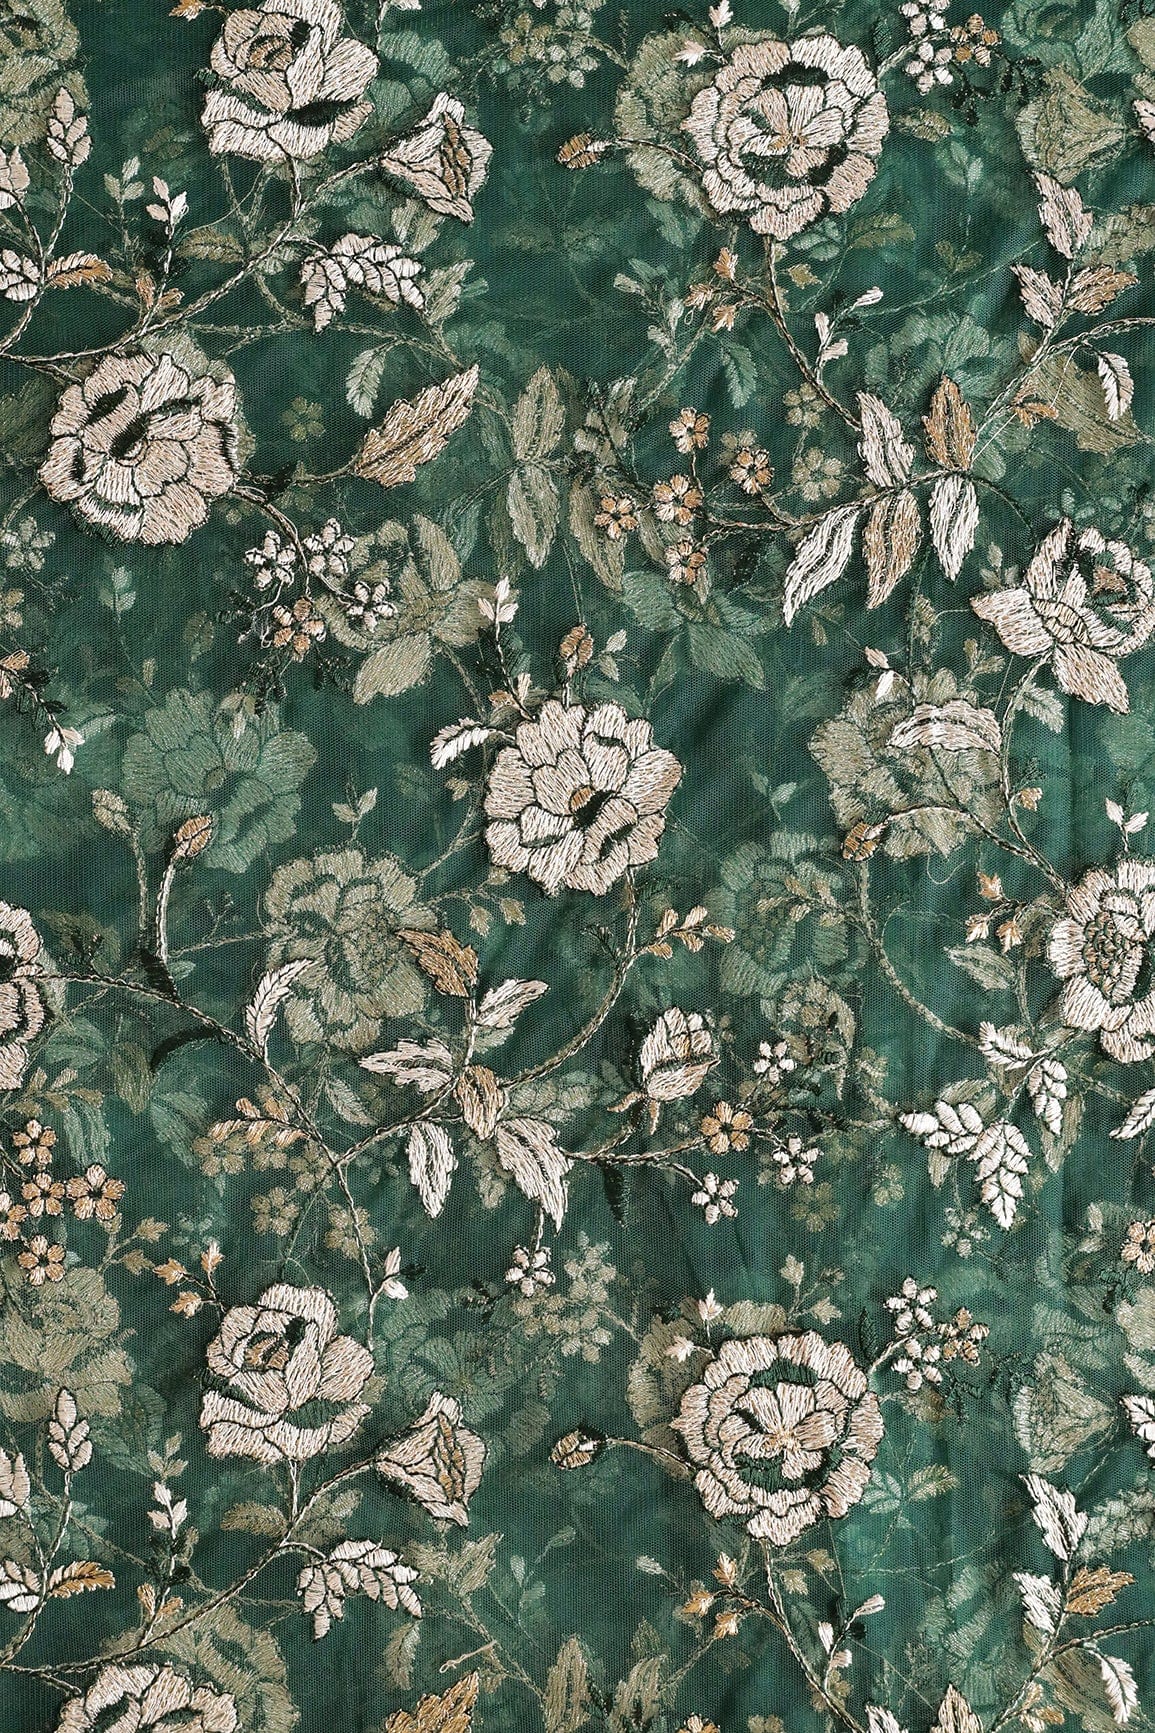 doeraa Embroidery Fabrics 1 Meter Cut Piece Of Heavy Floral Beige And Green Thread Work Embroidery On Green Soft Net Fabric